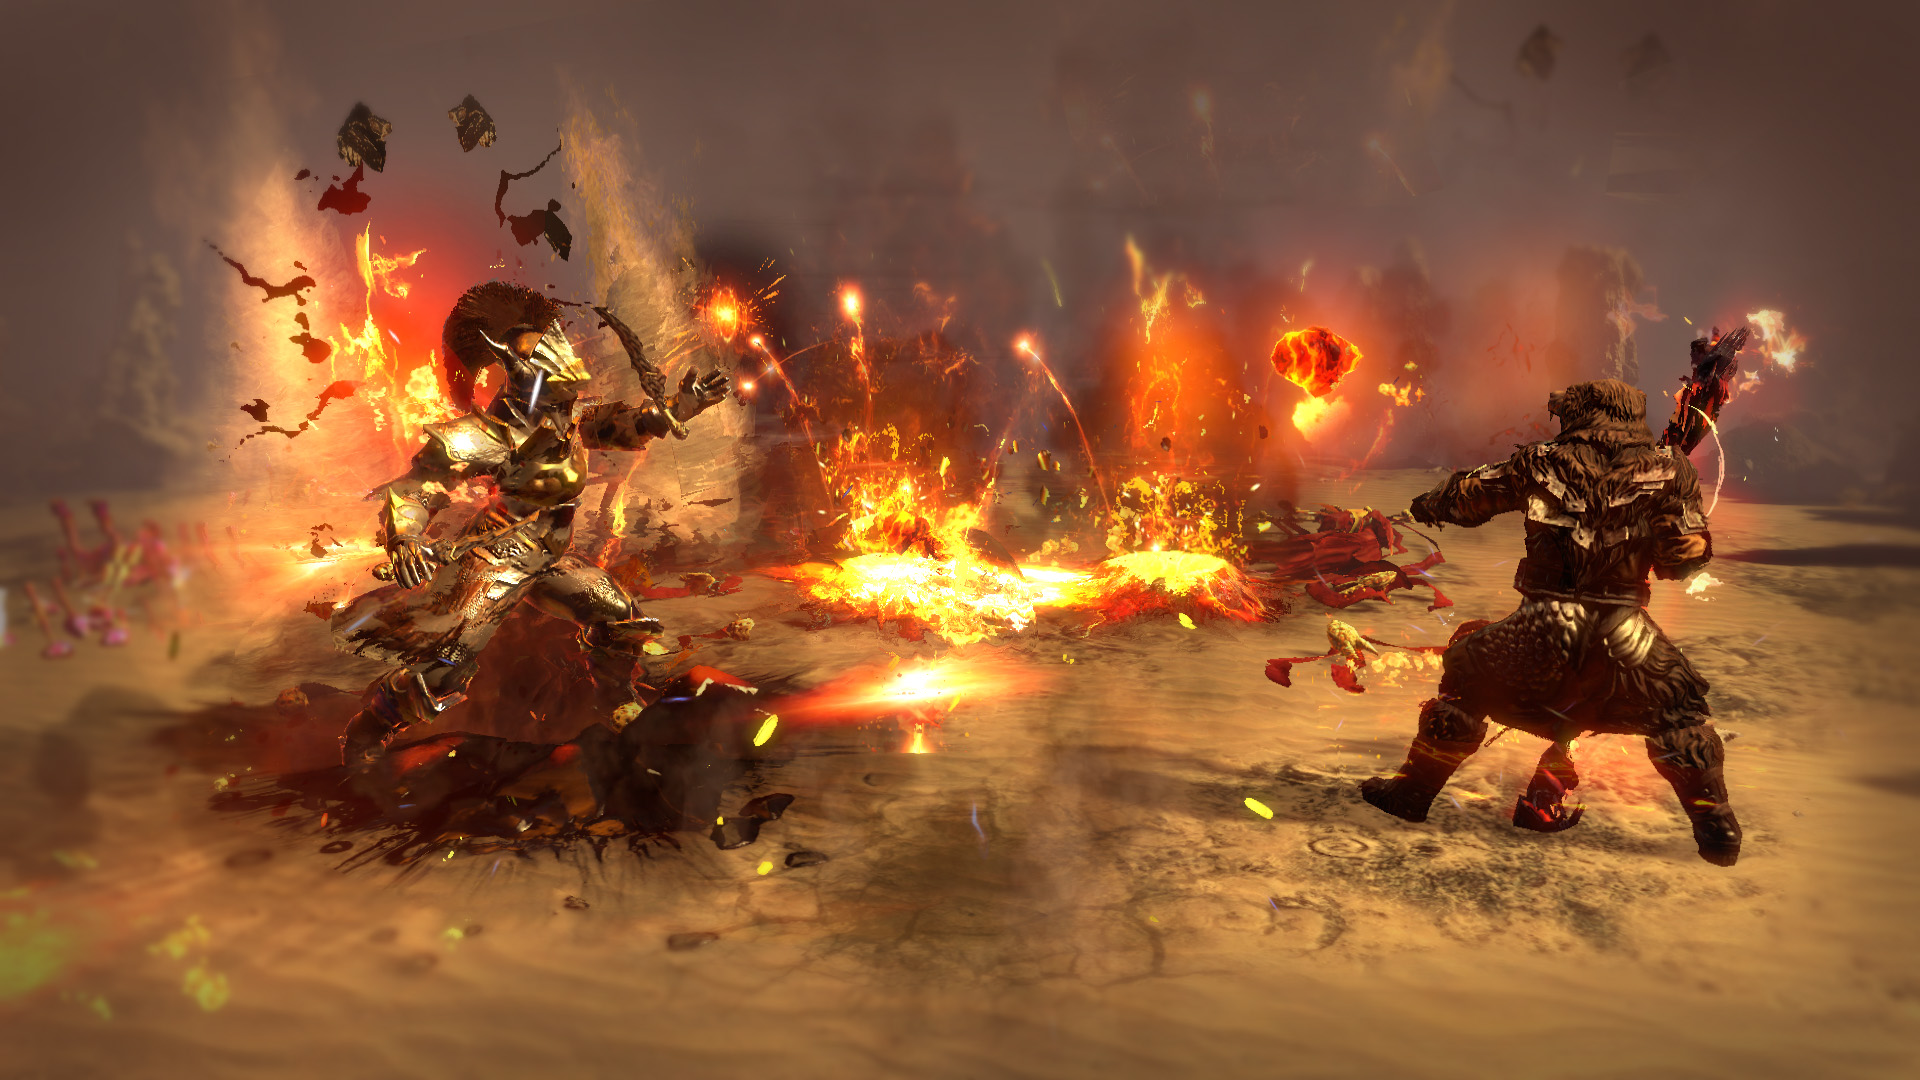 Let's check out the Path of Exile 2 Battle-Fueled Gameplay Trailer